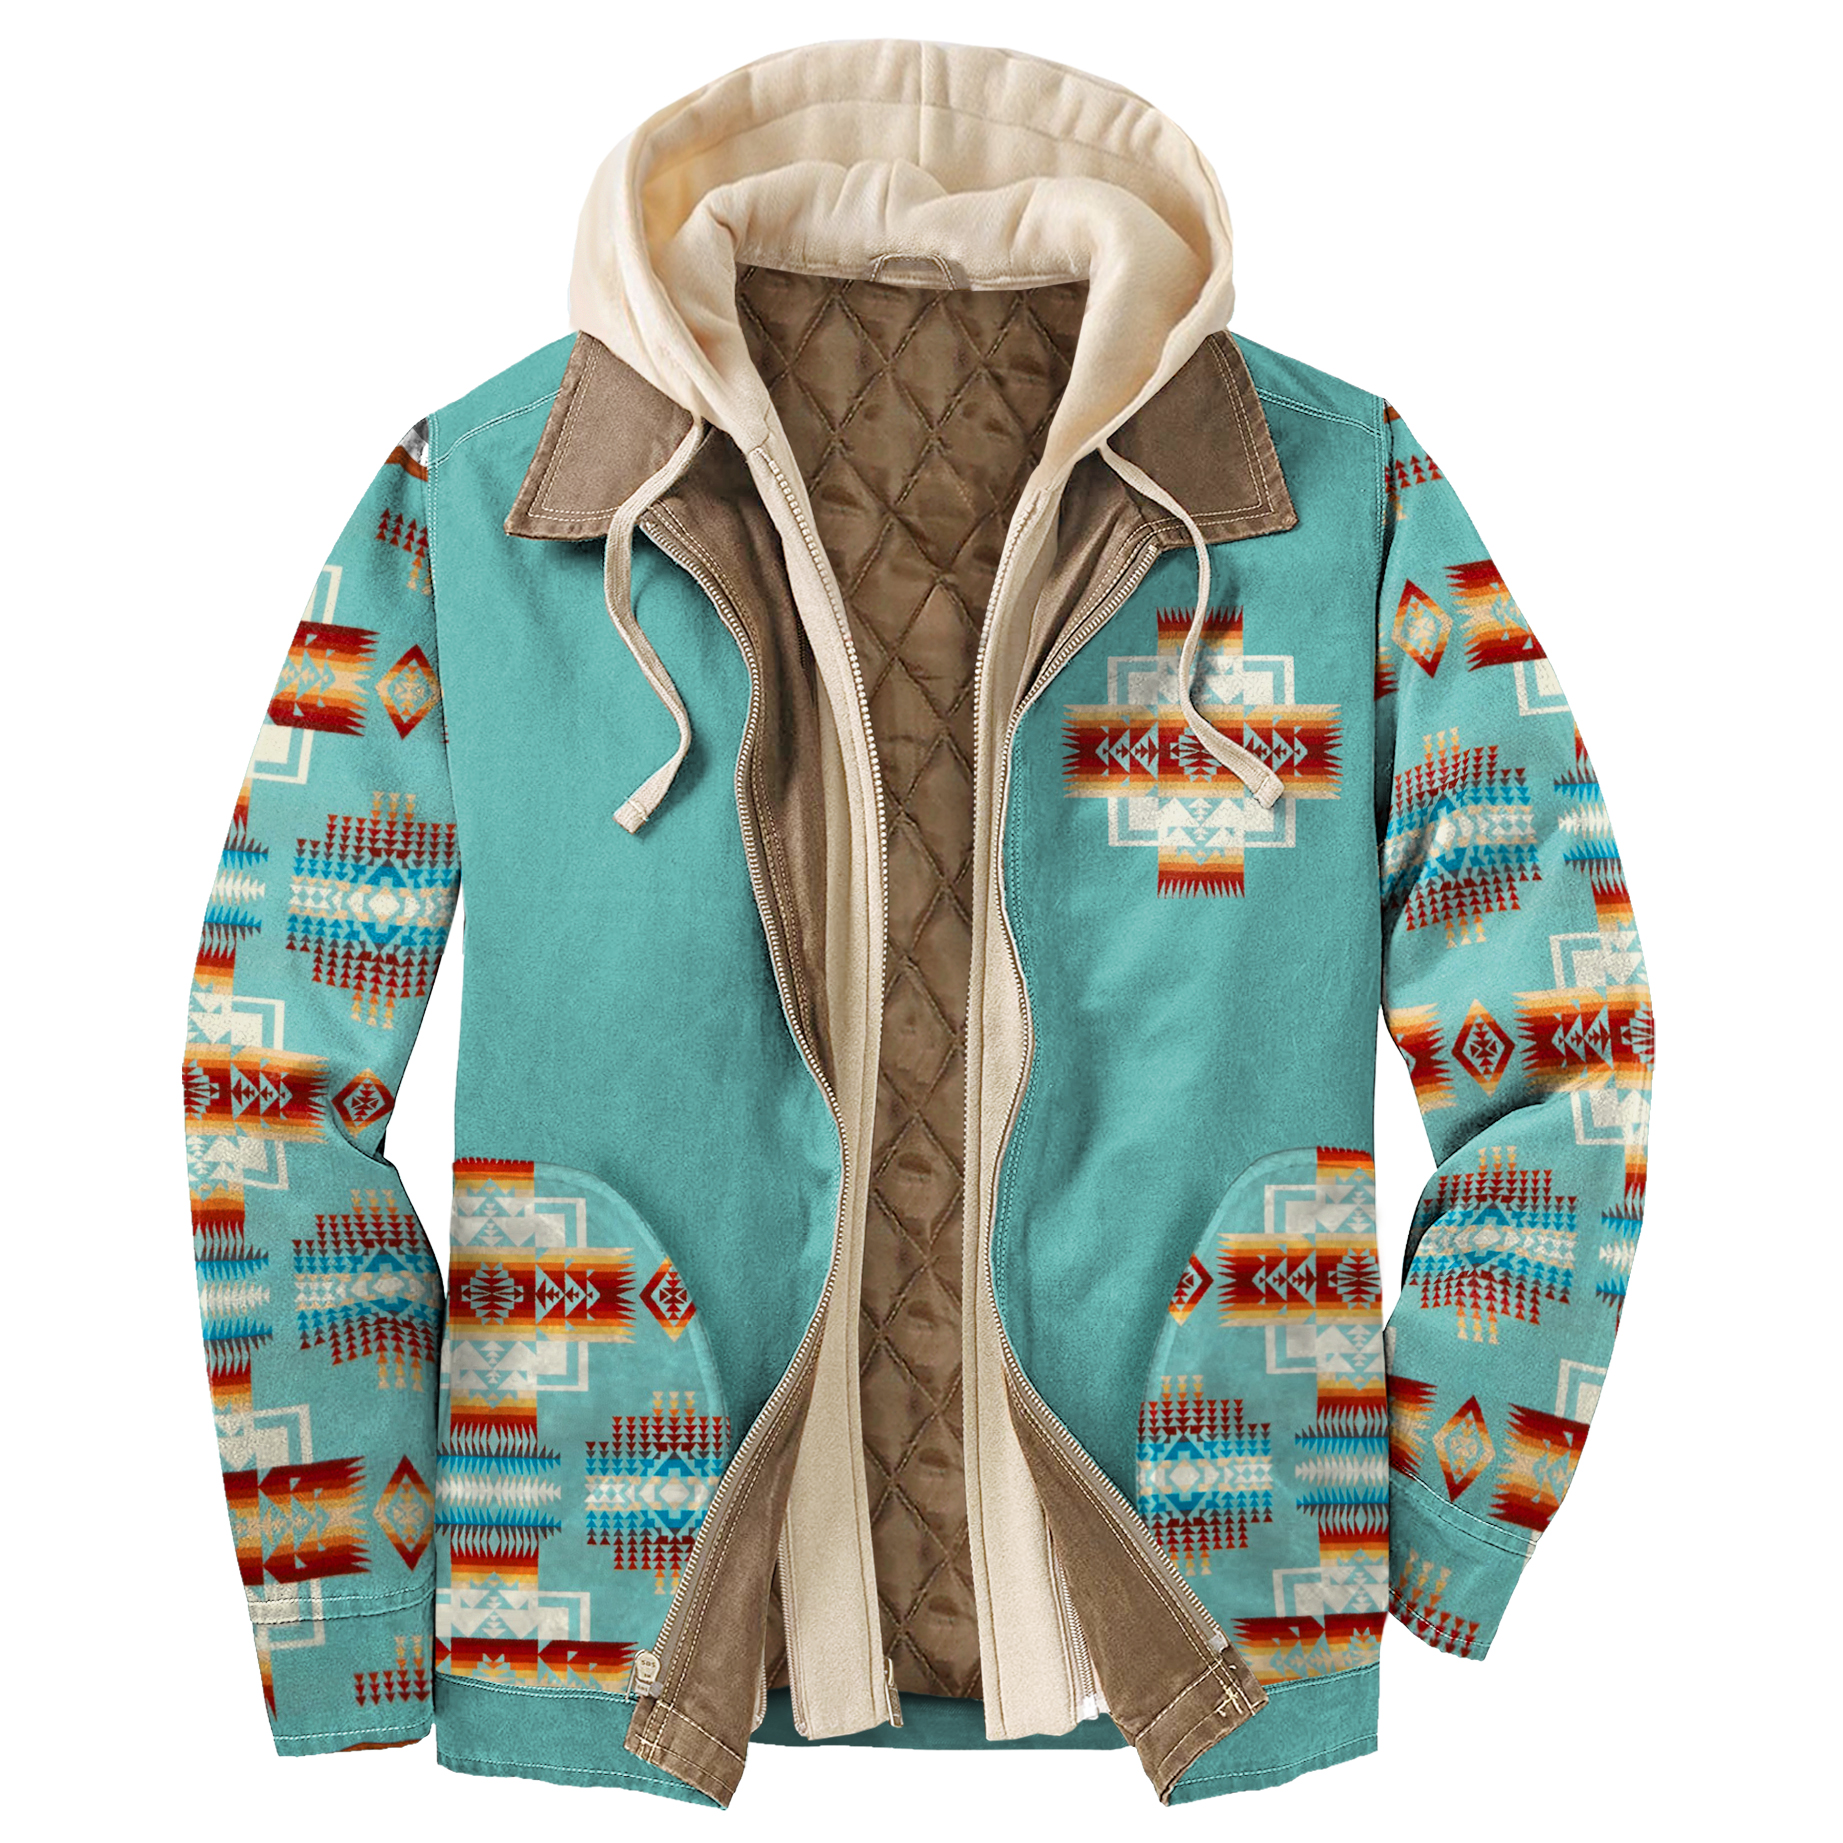 Men's Autumn & Winter Chic Outdoor Casual Vintage Ethnic Hooded Jacket